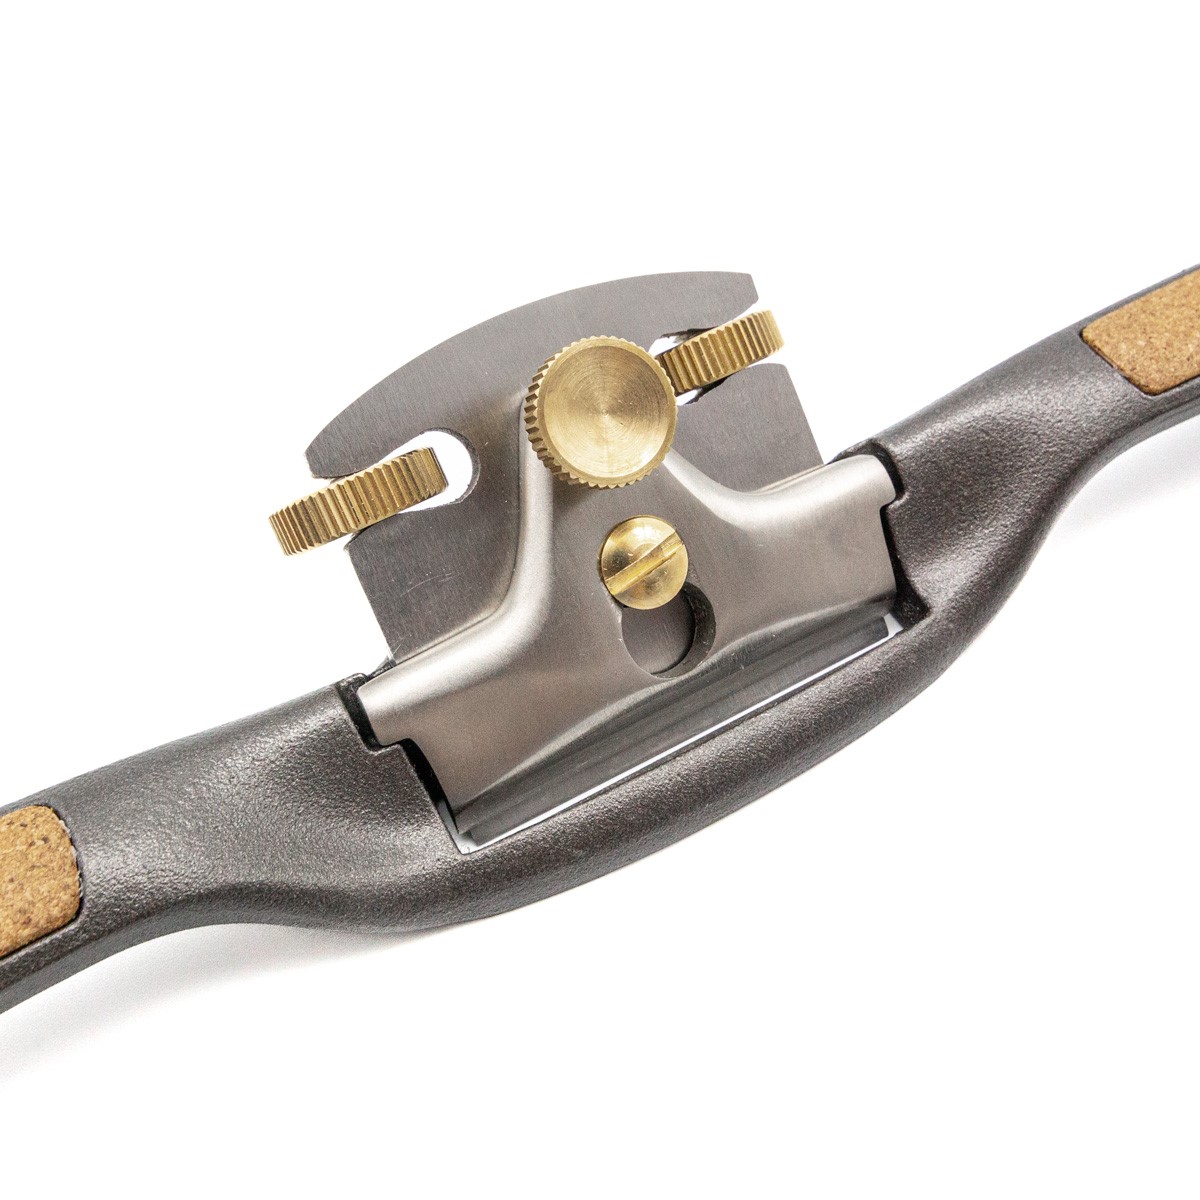 The Shaper: quality spokeshave options - Australian Wood Review